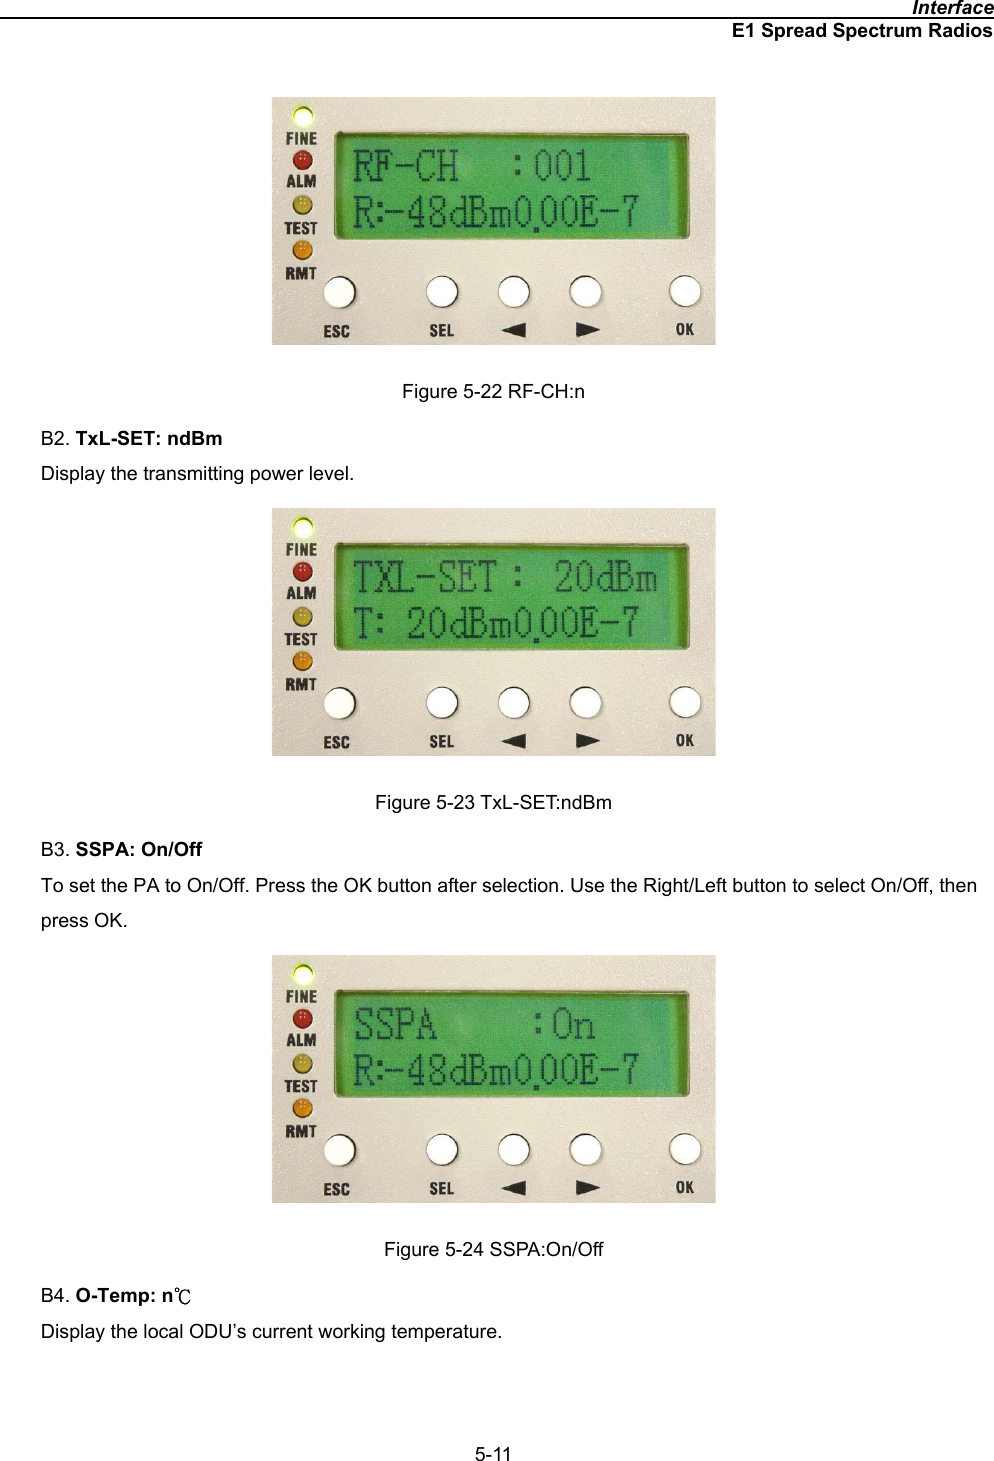                                                                                              InterfaceE1 Spread Spectrum Radios5-11 Figure 5-22 RF-CH:n B2. TxL-SET: ndBmDisplay the transmitting power level. Figure 5-23 TxL-SET:ndBm B3. SSPA: On/OffTo set the PA to On/Off. Press the OK button after selection. Use the Right/Left button to select On/Off, then press OK. Figure 5-24 SSPA:On/Off B4. O-Temp: nкDisplay the local ODU’s current working temperature. 